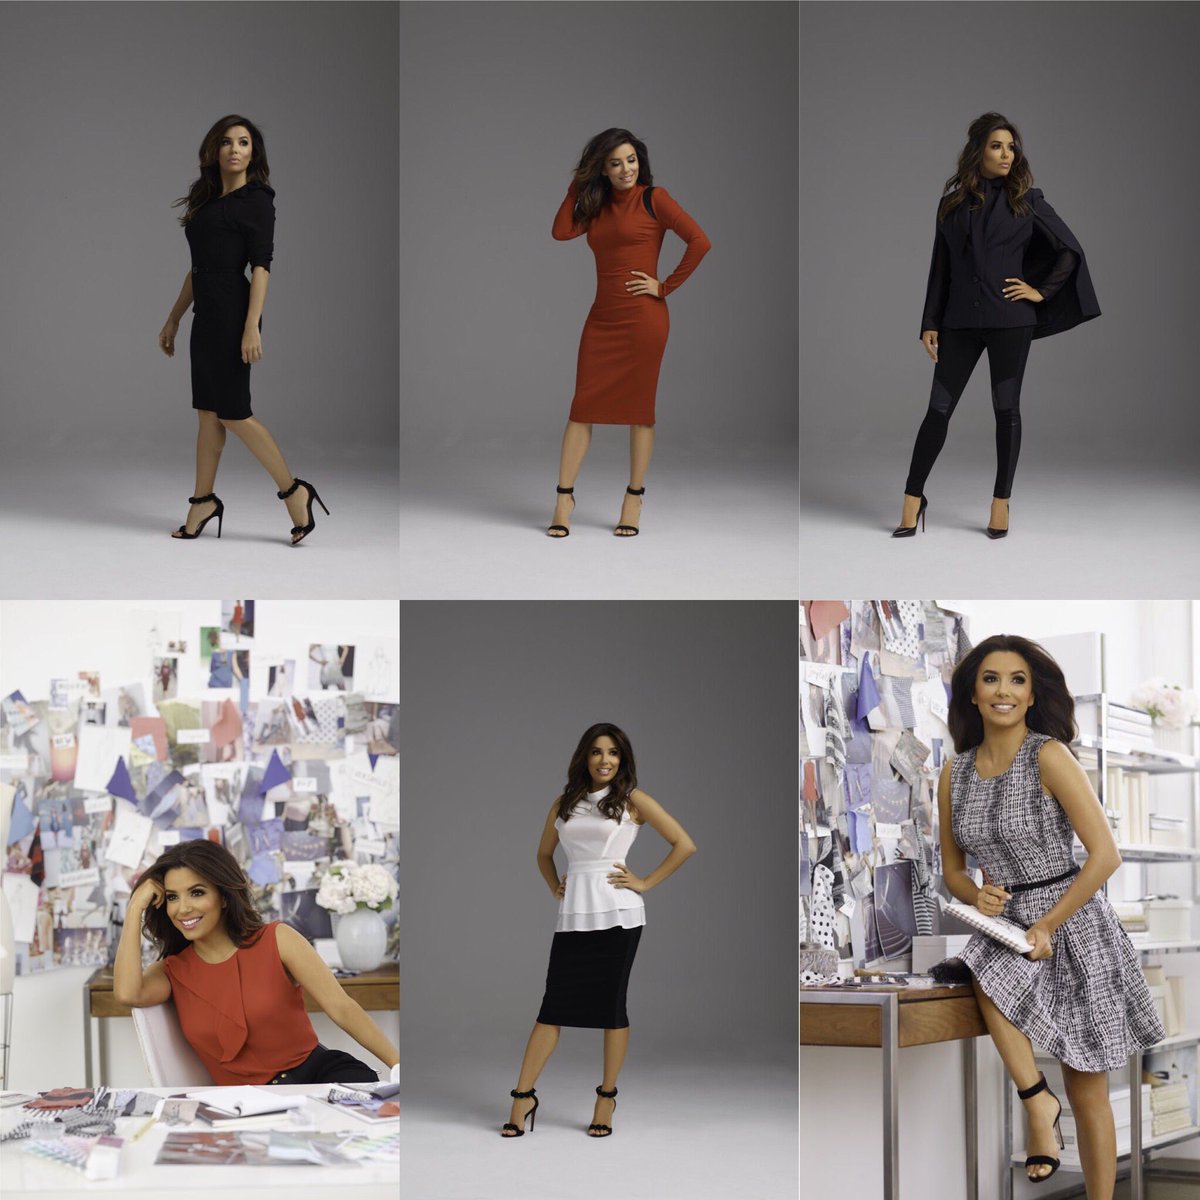 New pieces from the Eva Longoria Collection available TODAY at @thelimited! #EvaForTheLimited https://t.co/RhsKIBRJof